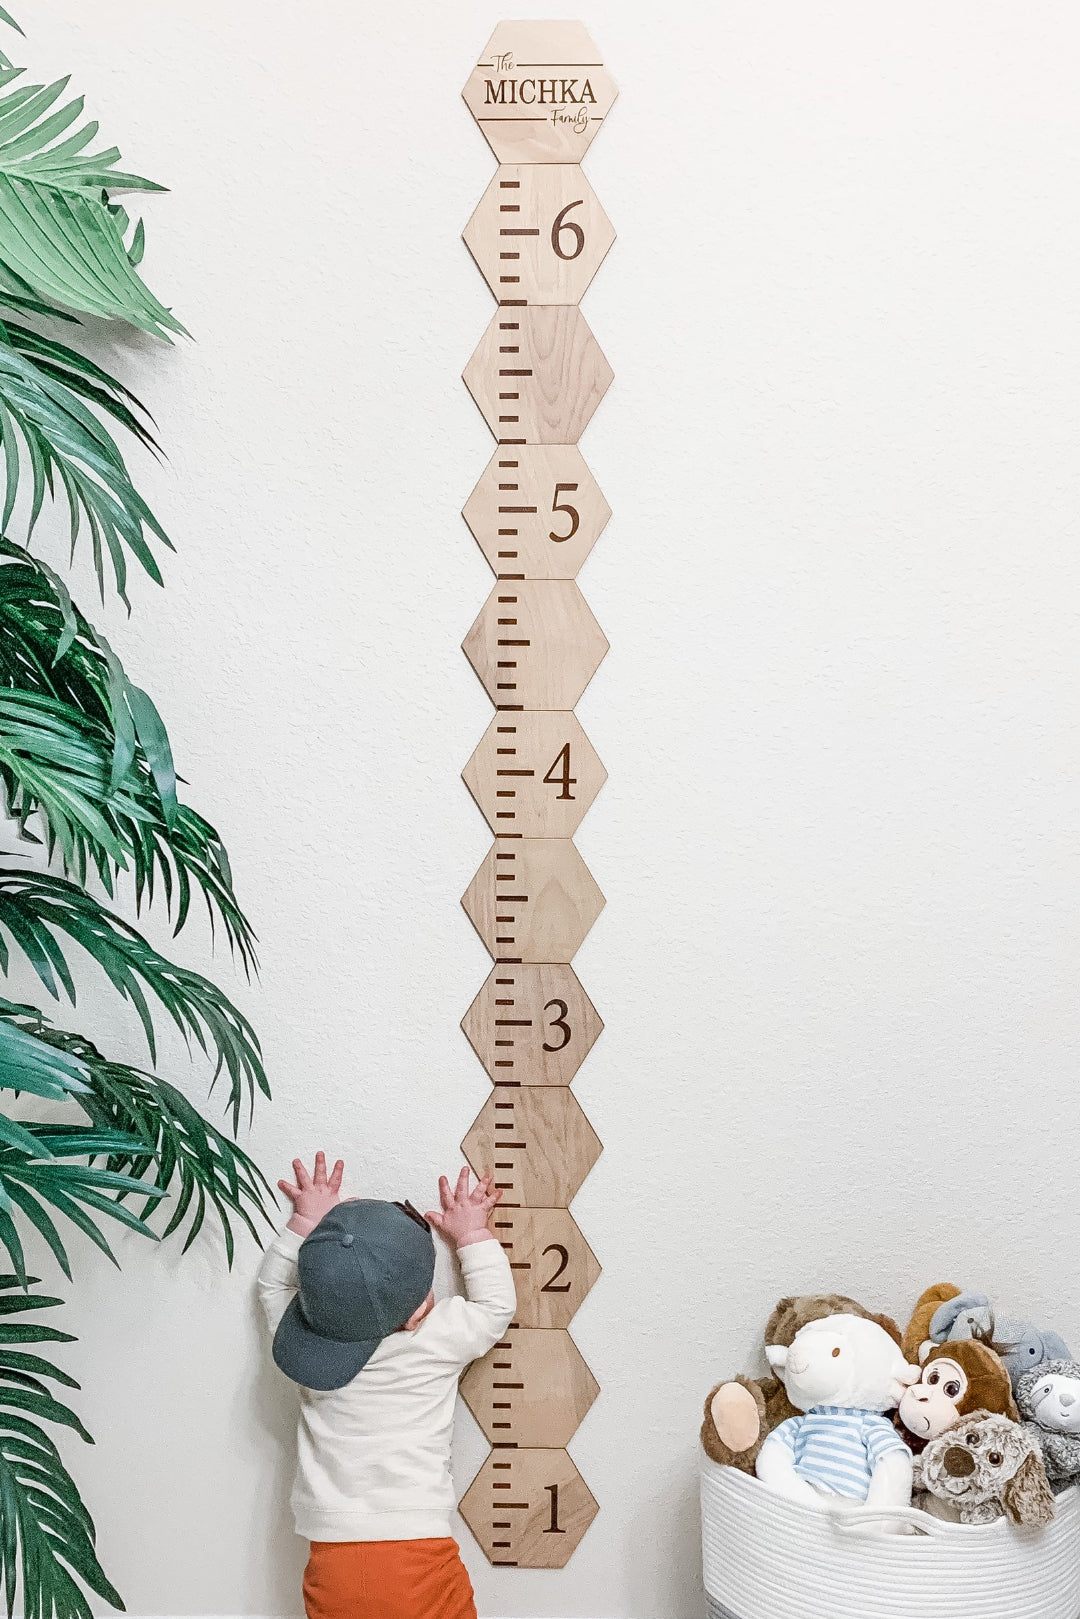 Wooden Hexagonal Patchwork Growth Chart For Kids on the Wall